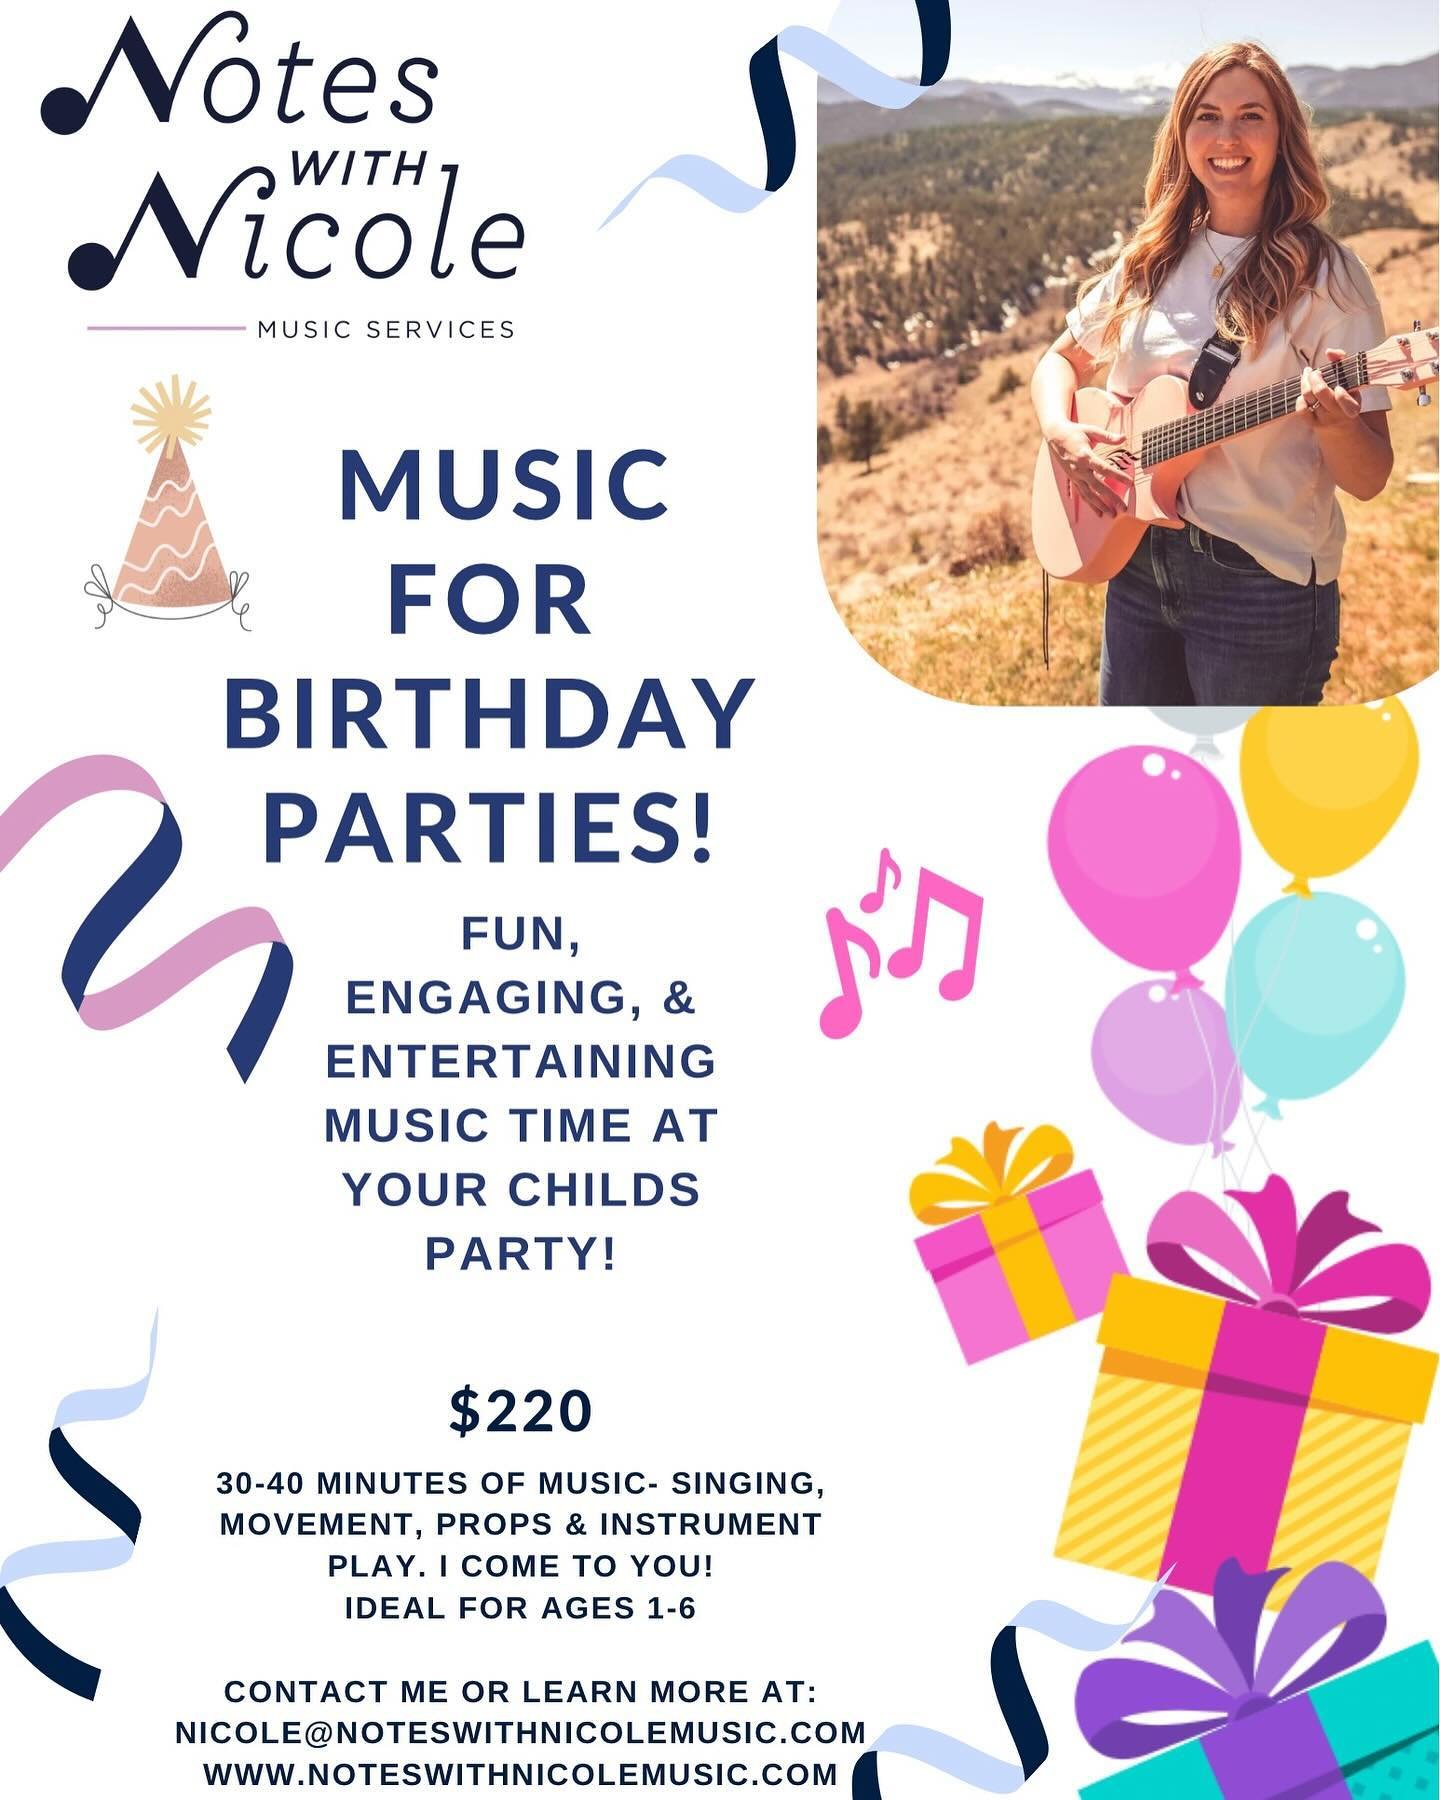 Music for birthday parties!! 🥳 Did you know Notes with Nicole can provide fun and engaging music classes for your child&rsquo;s birthday party? Make the day extra special with music time featuring their favorite songs, singing, dancing, and instrume